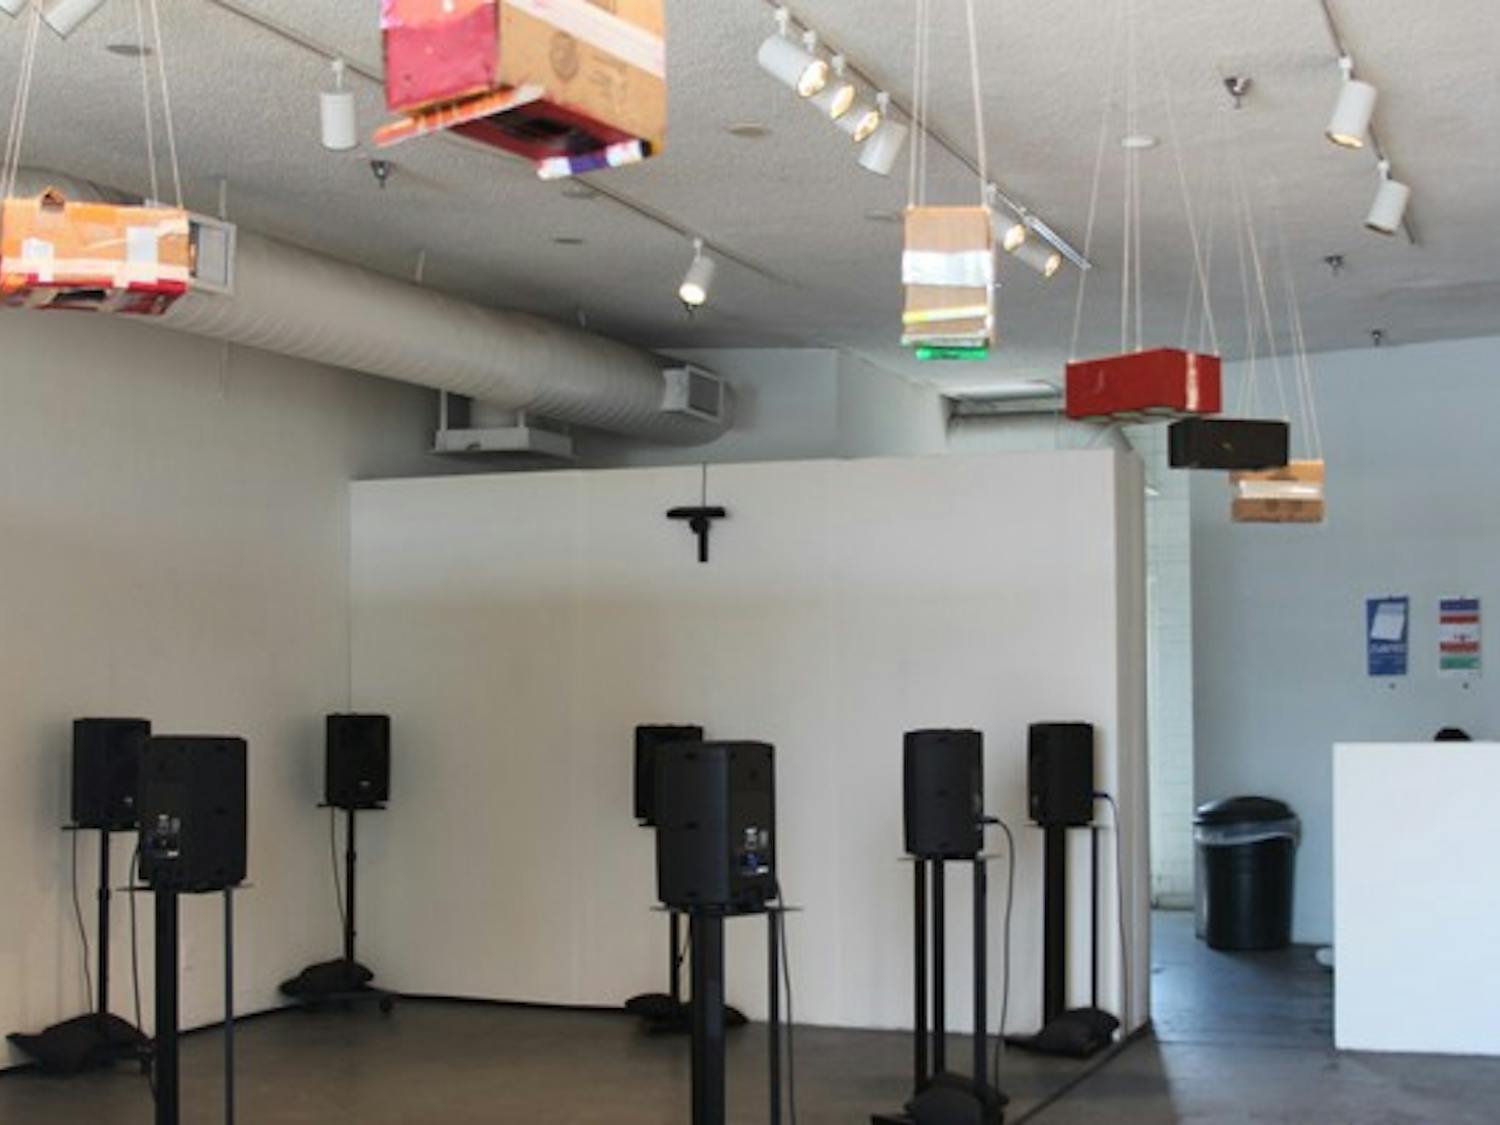 Una Casa de Sonidos is an interactive sound space that is appealing to all ages by Blake McConnell. The thesis exhibition show is open April 1-5 at ASU's Step Gallery located on 9th Street and Mill Avenue. (Photo by Ashley Kesweder)